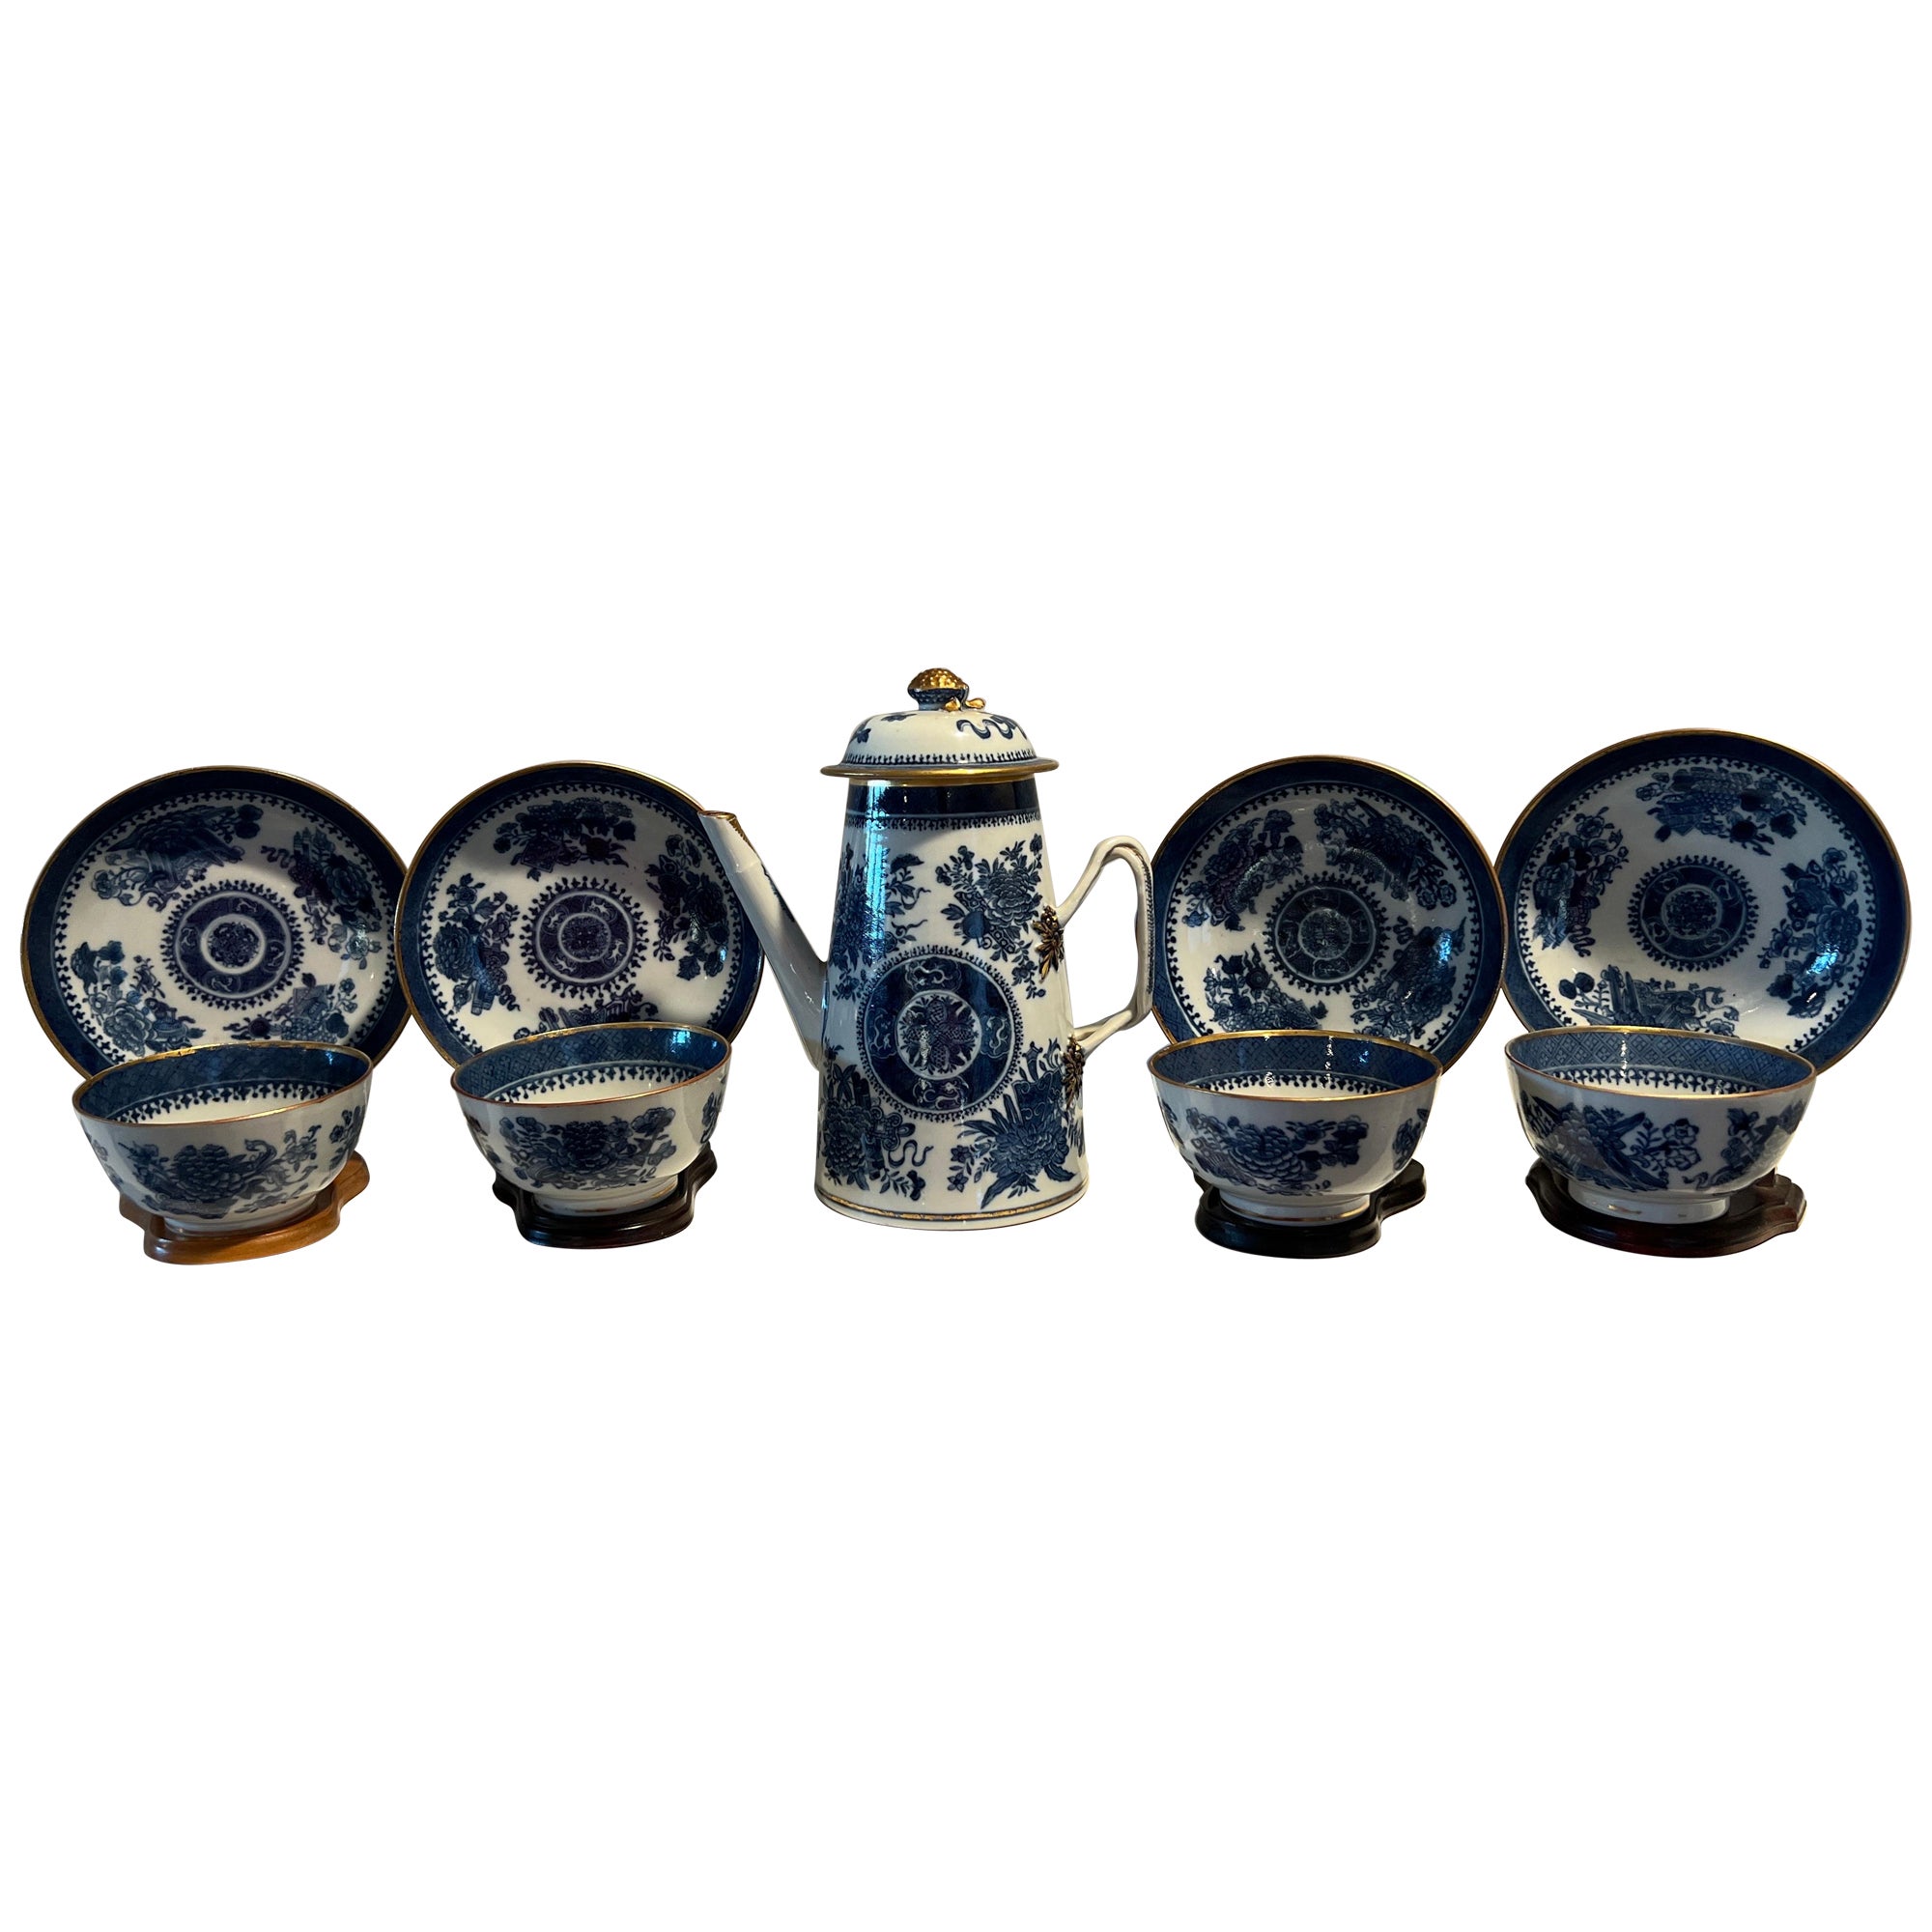 9 Pc, 18th C. Chinese Export "Fitzhugh Gold" Blue & White Porcelain Coffee Set For Sale